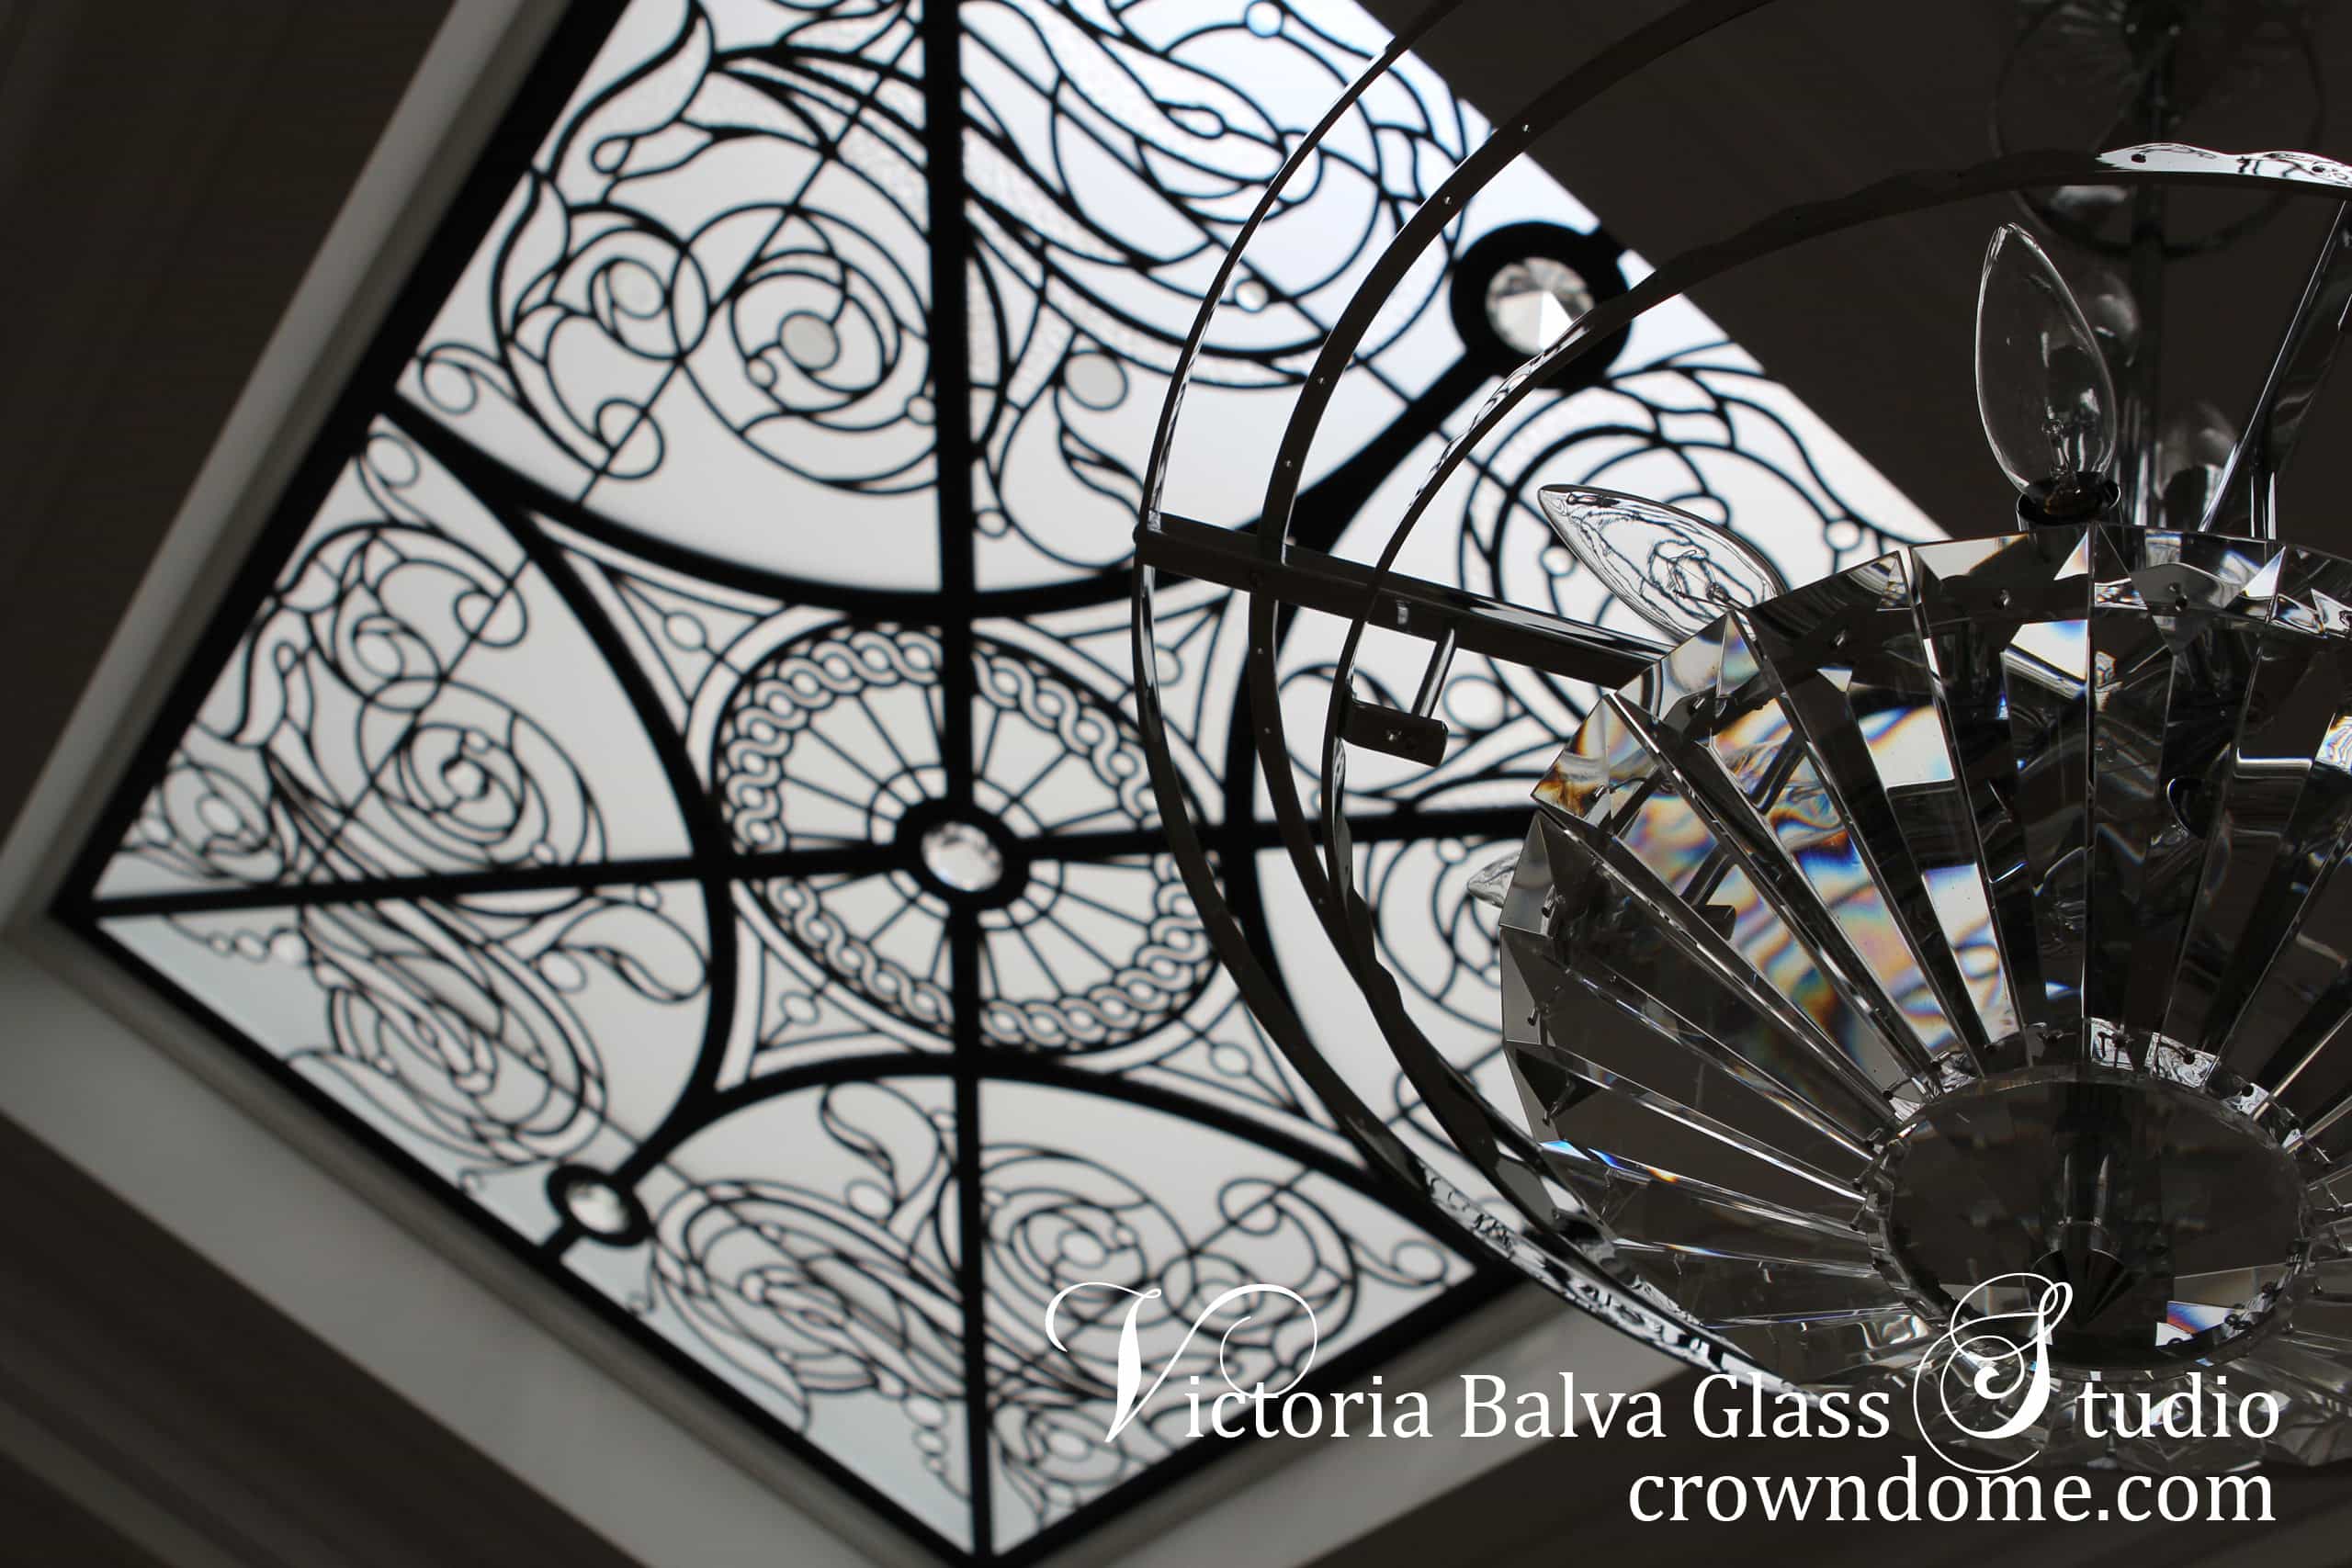 Decorative glass skylight ceiling Germana with crystal chandeliers in classic style with large crystal jewels for a hallway of a luxury built private residence. Clear textured glass, beveled glass, clear crystal jewels. Original design by glass artist Victoria Balva